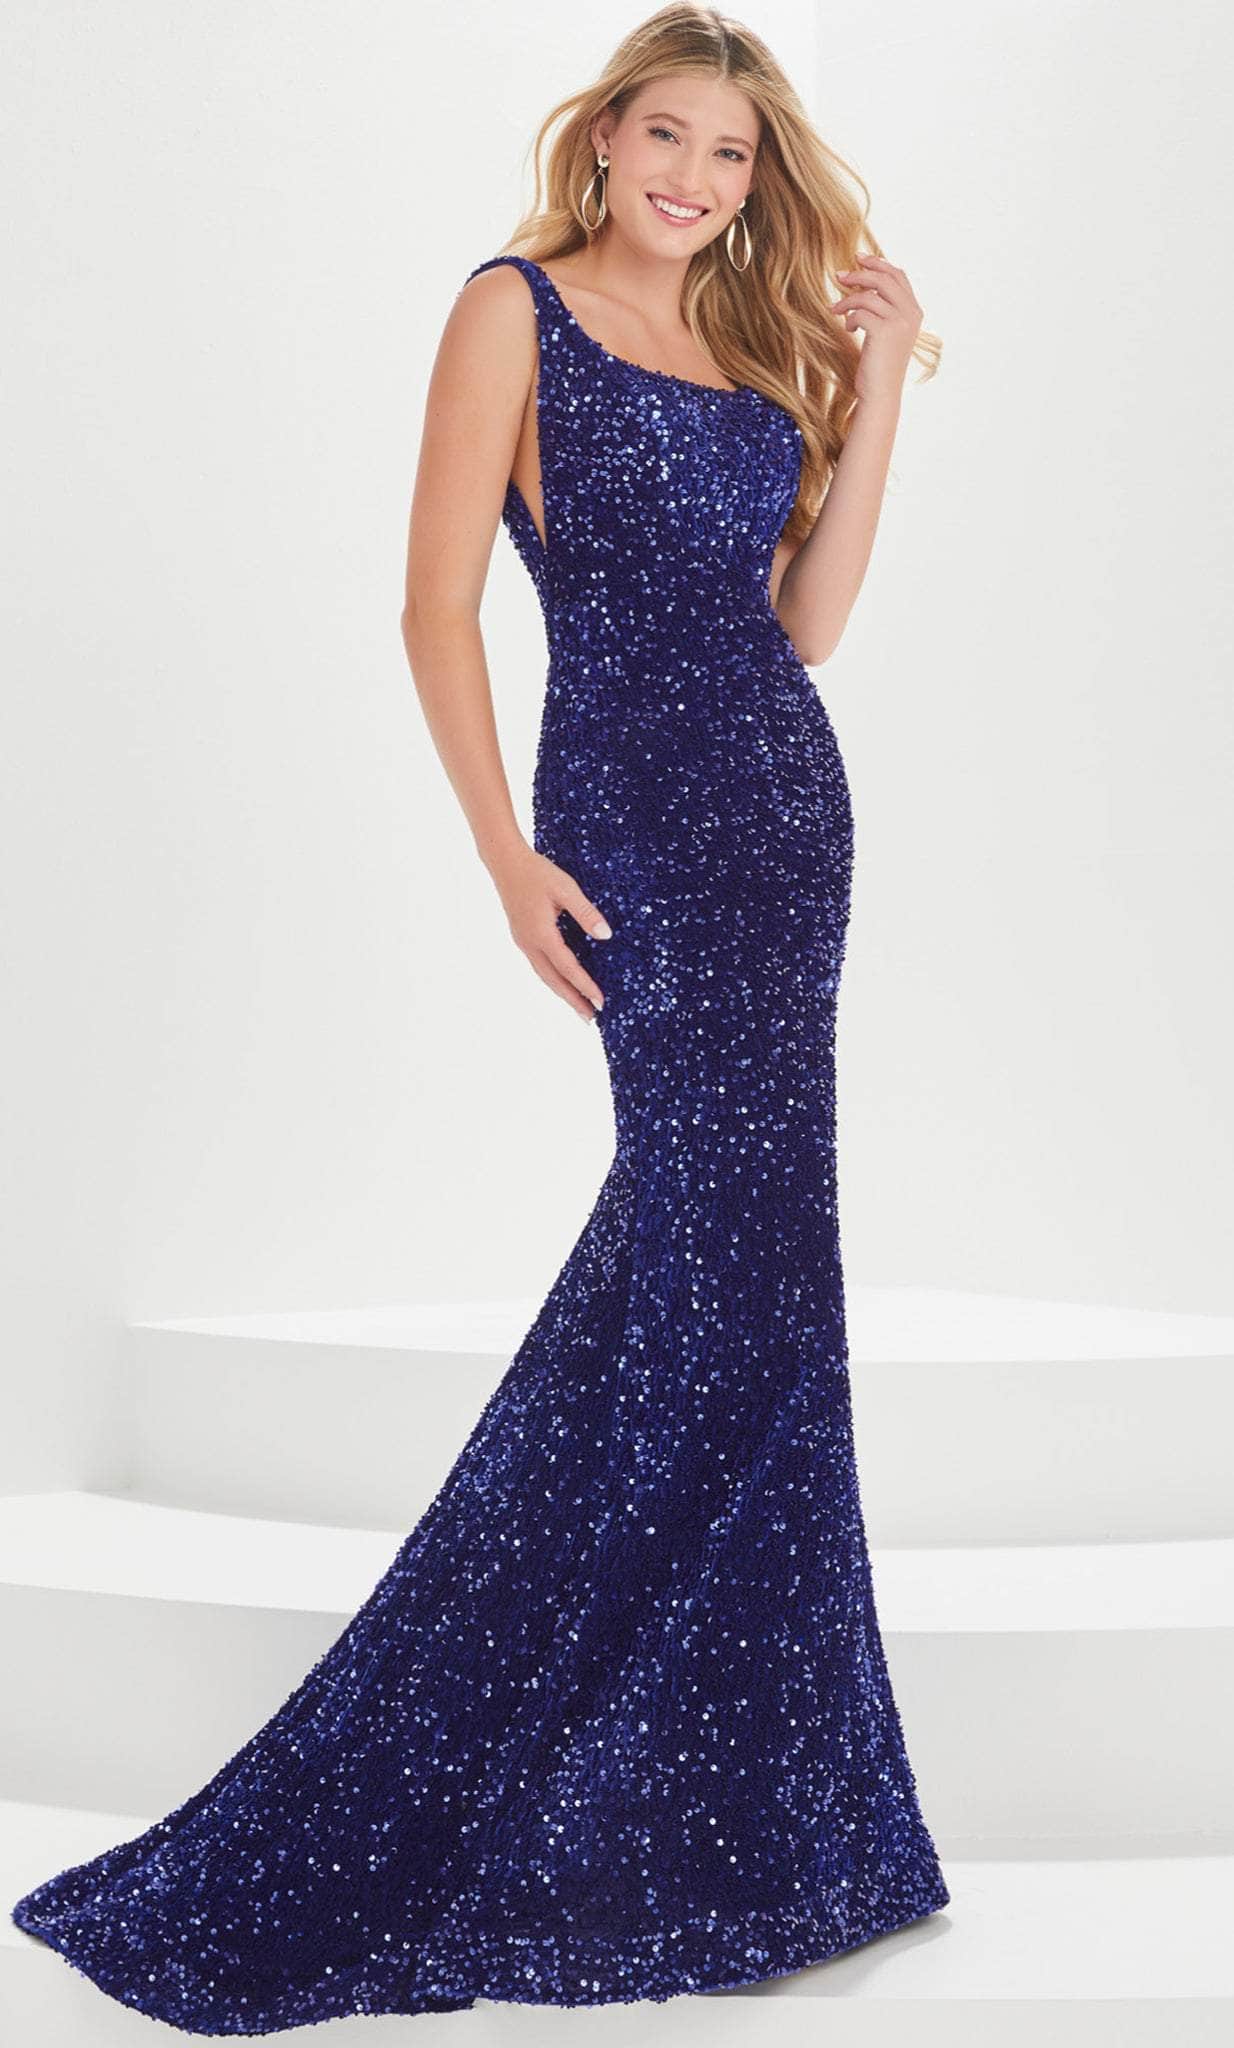 Tiffany Designs by Christina Wu 16008 - Sequined Evening Gown
